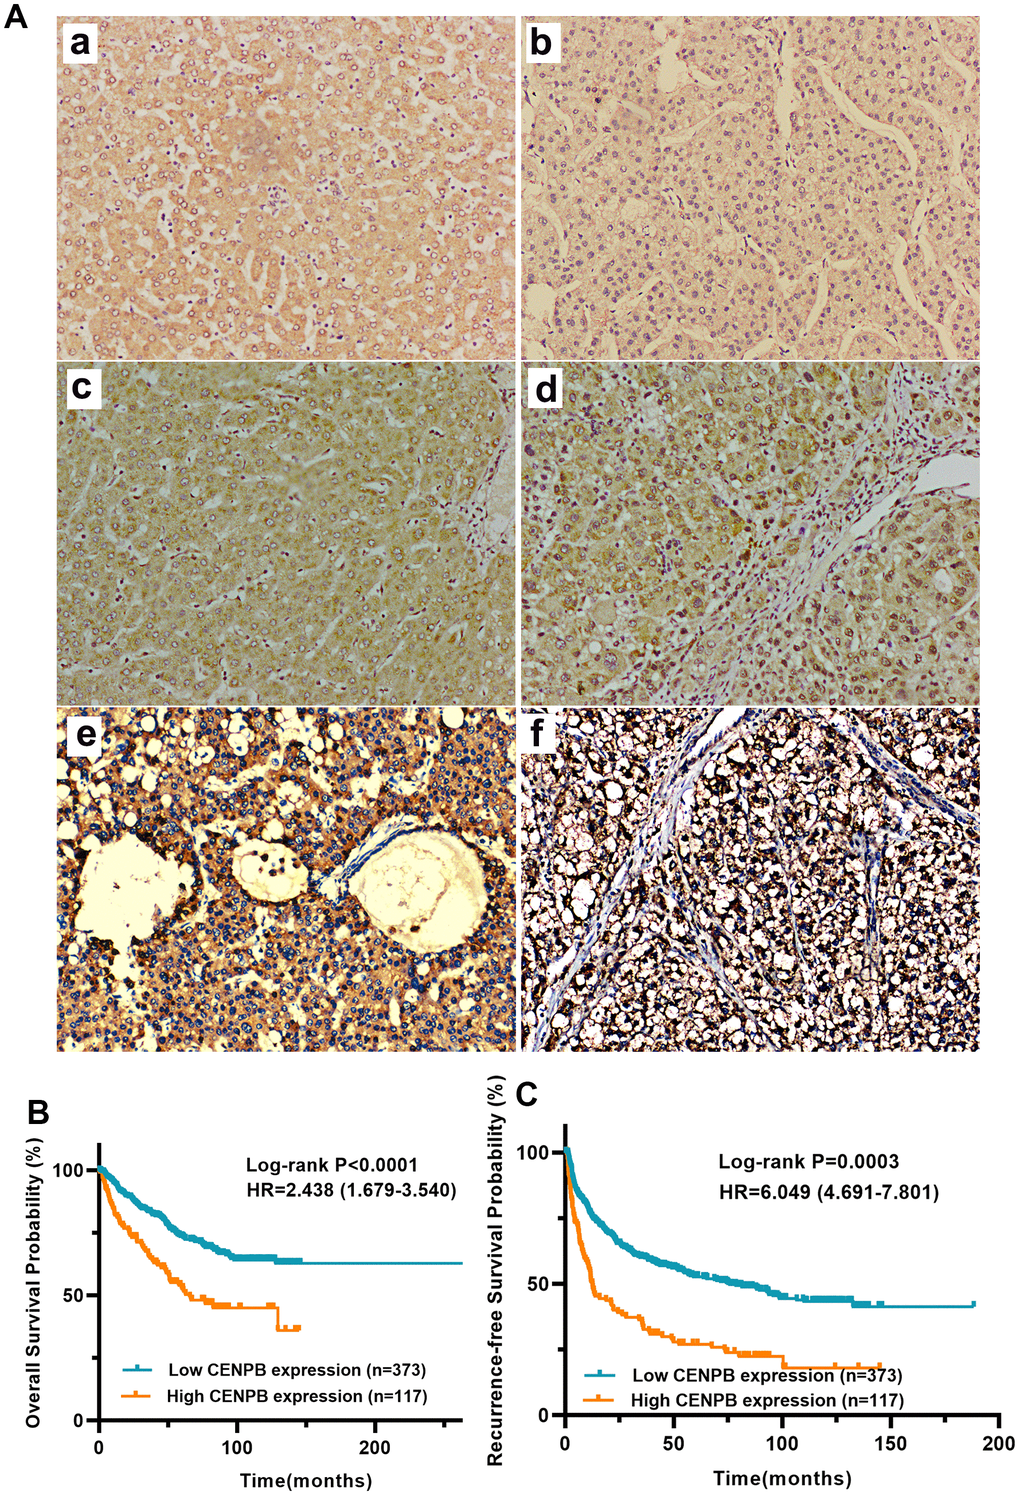 (A) CENPB protein expression and its prognostic value in a cohort with 490 HCC patients. (A) Representative IHC images of normal liver tissue (a) and HCC tissue with IHC scores 0 (b), 1 (c), 2 (d), 3 (e), and 4 (f), respectively, are shown below. (B, C) High expression of CENPB protein was found to be indicative of unfavorable OS (B) and RFS (C).